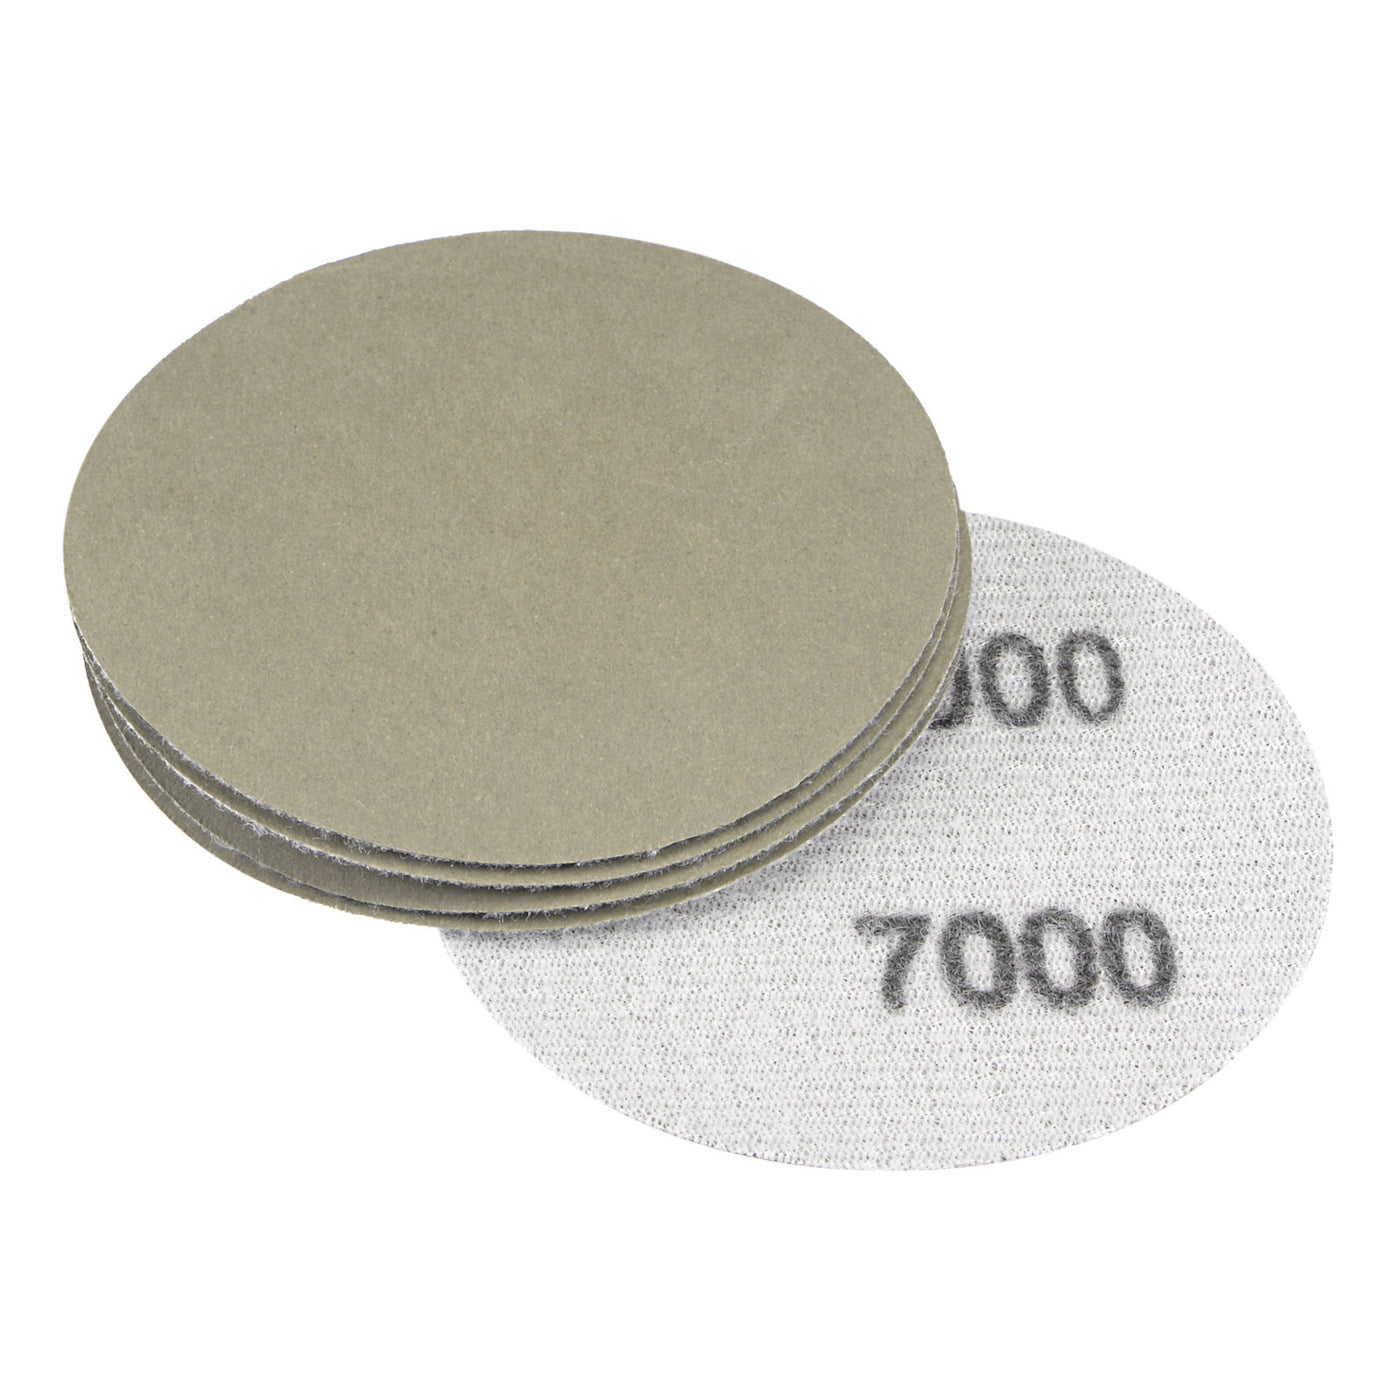 Uxcell Uxcell 3 Inch 1500 Grit Sanding Discs Wet/Dry Hook and Loop Silicon Carbide Round 5Pcs